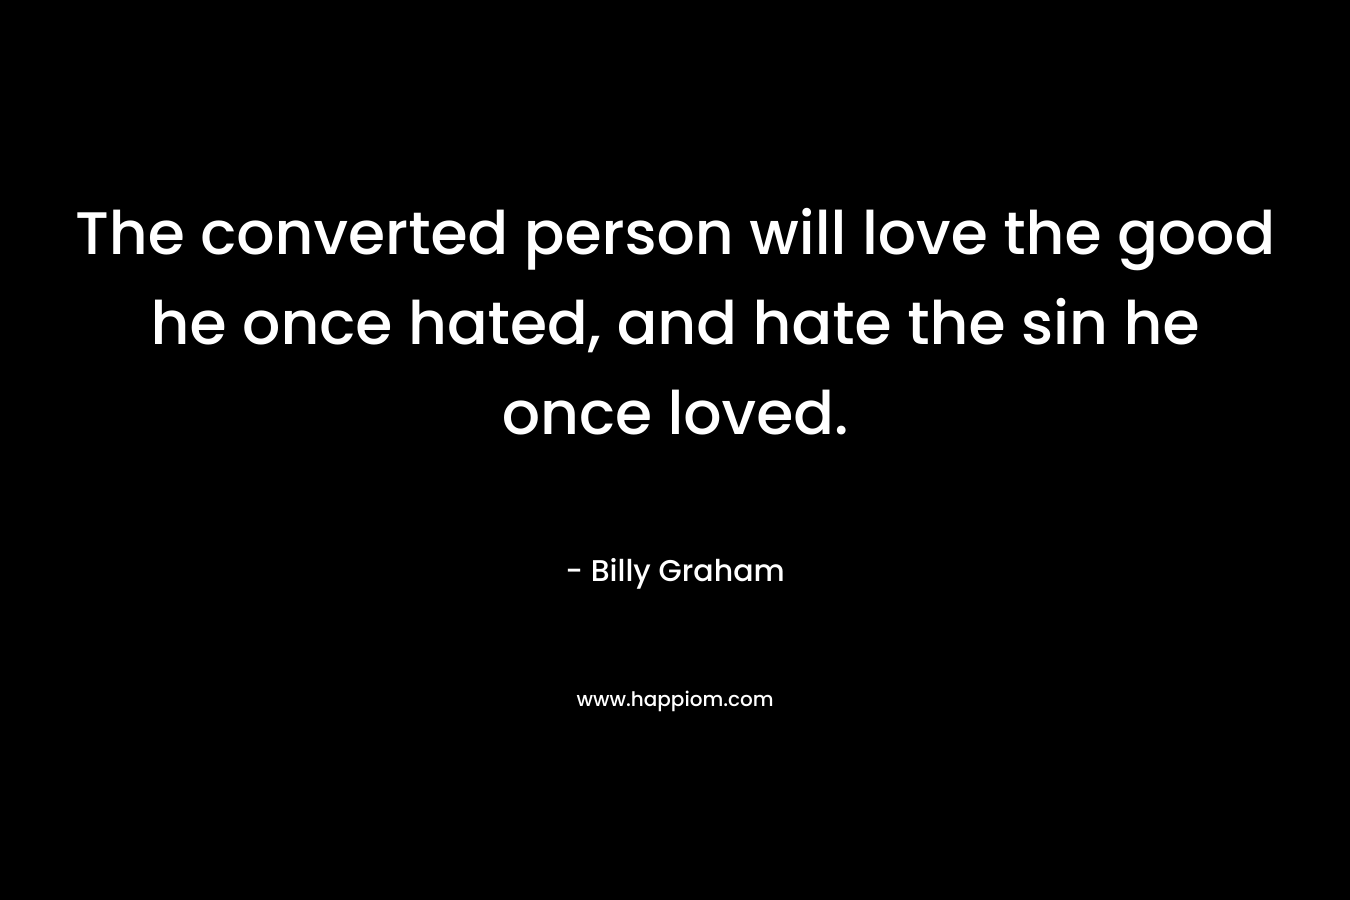 The converted person will love the good he once hated, and hate the sin he once loved. – Billy Graham